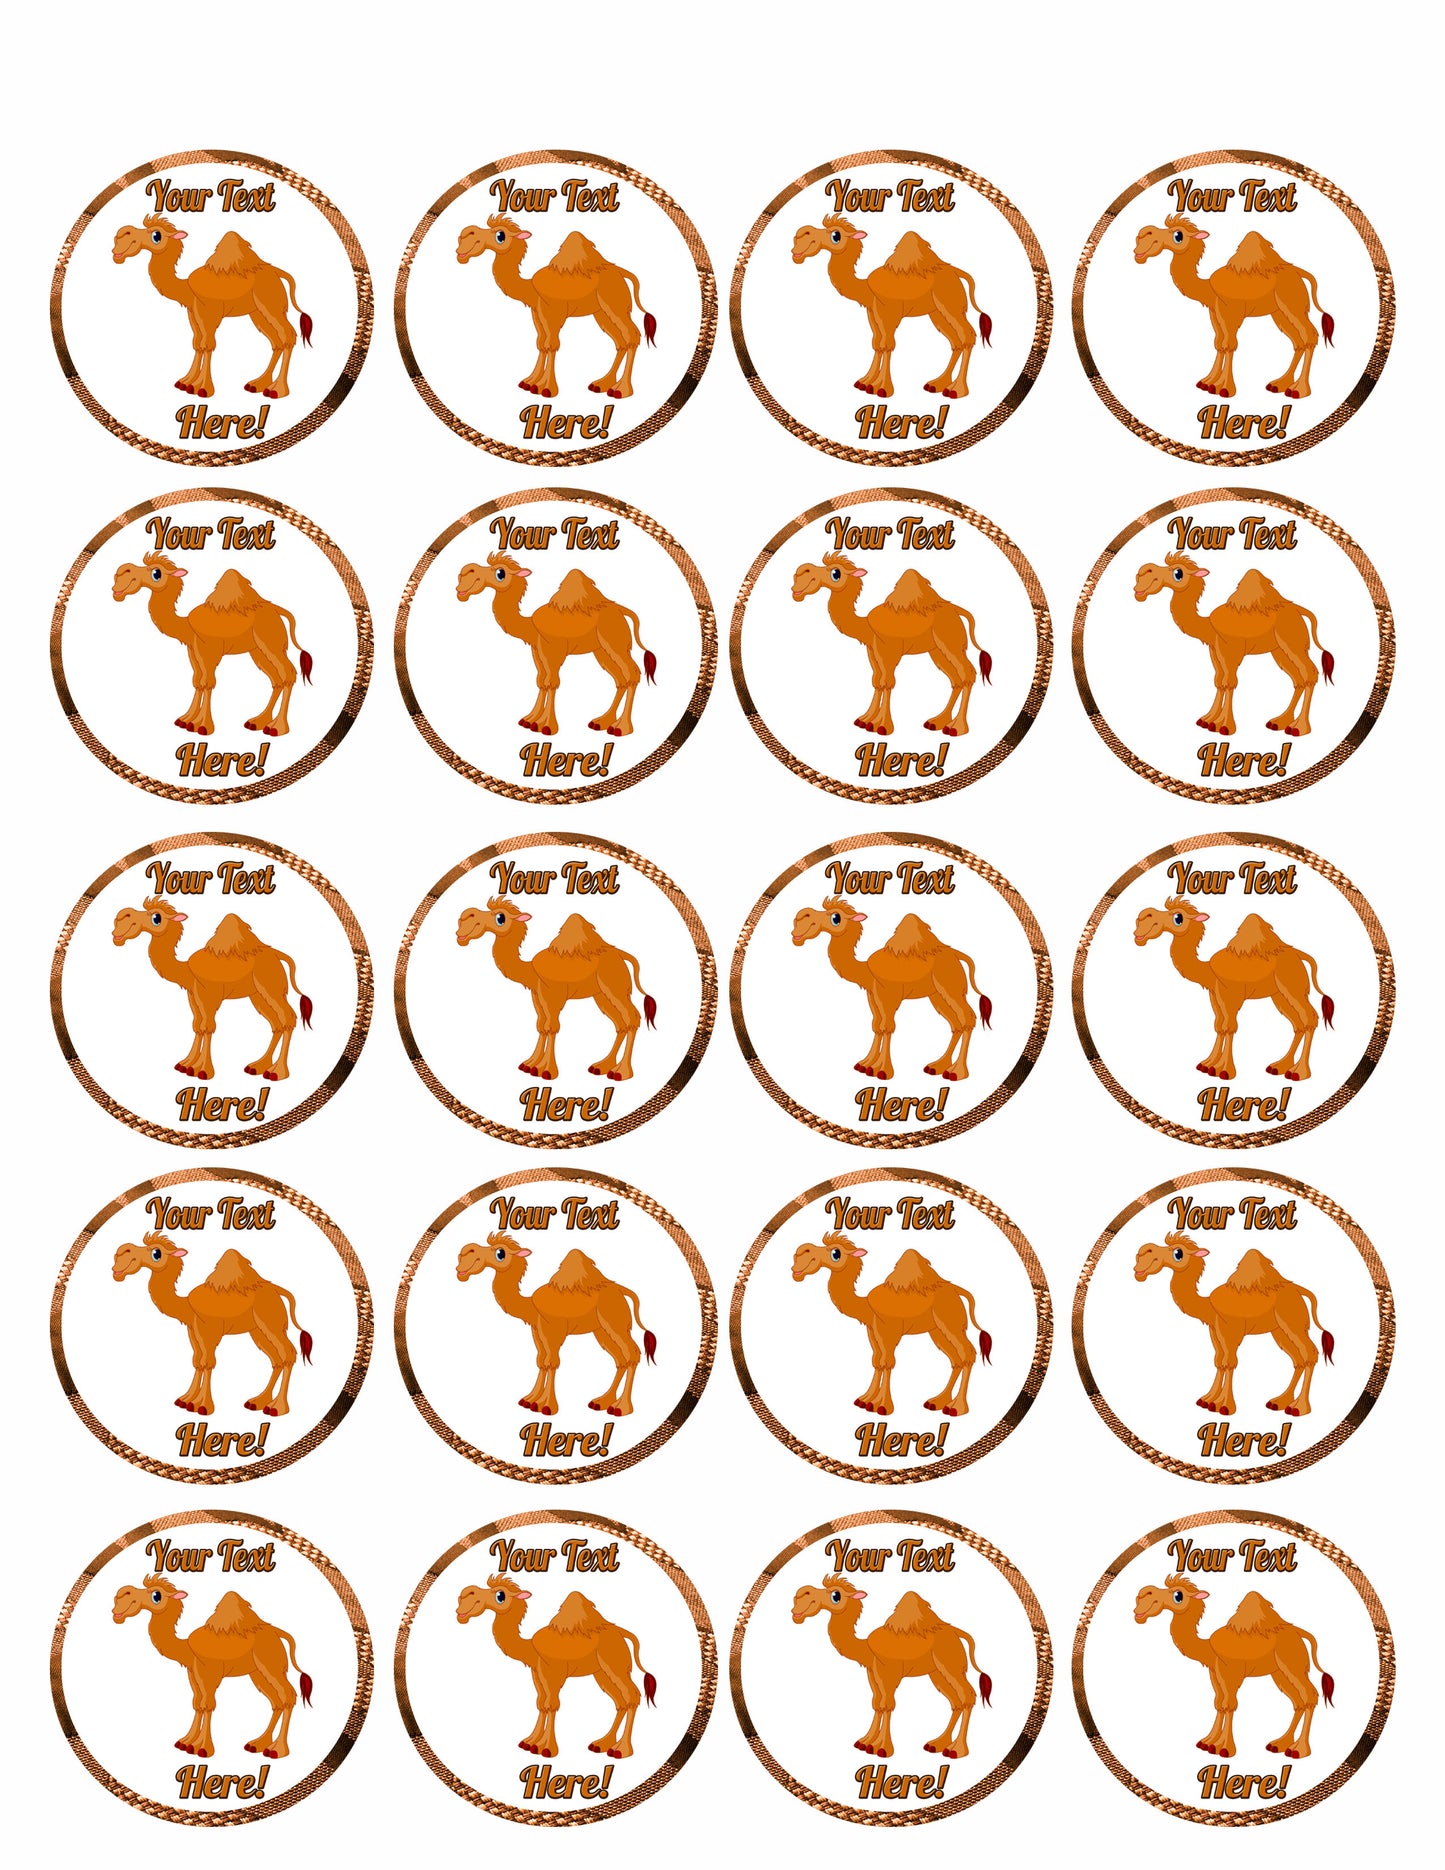 Cute Funny Camel - Edible Cake Topper, Cupcake Toppers, Strips